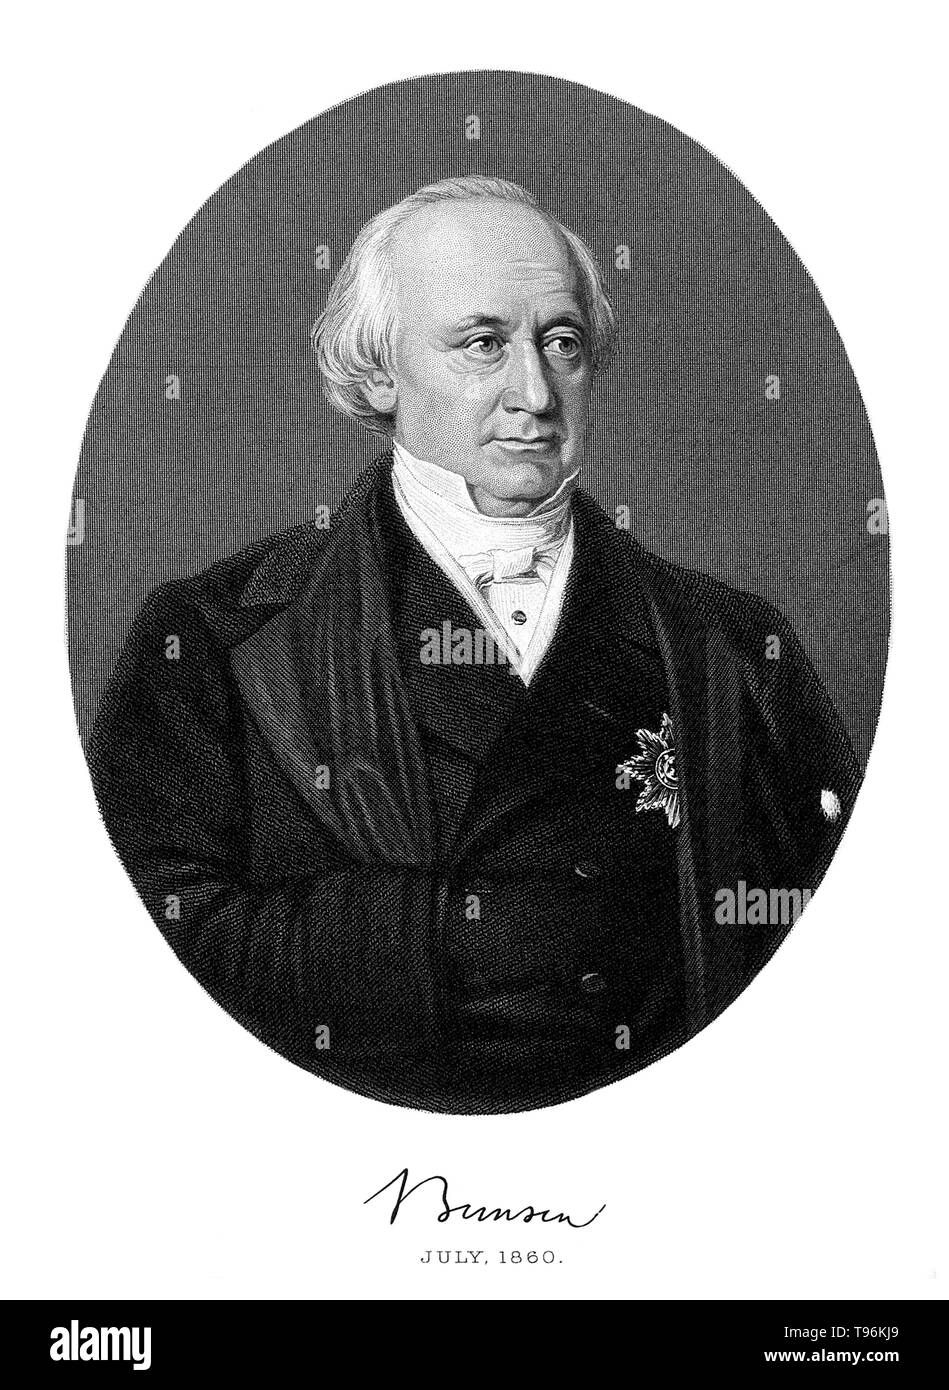 Robert Wilhelm Eberhard Bunsen (March 30, 1811 - Augus 16, 1899) was a German chemist. He investigated emission spectra of heated elements, and discovered caesium (in 1860) and rubidium (in 1861) with the physicist Gustav Kirchhoff. Bunsen developed several gas-analytical methods, was a pioneer in photochemistry, and did early work in the field of organoarsenic chemistry. Stock Photo